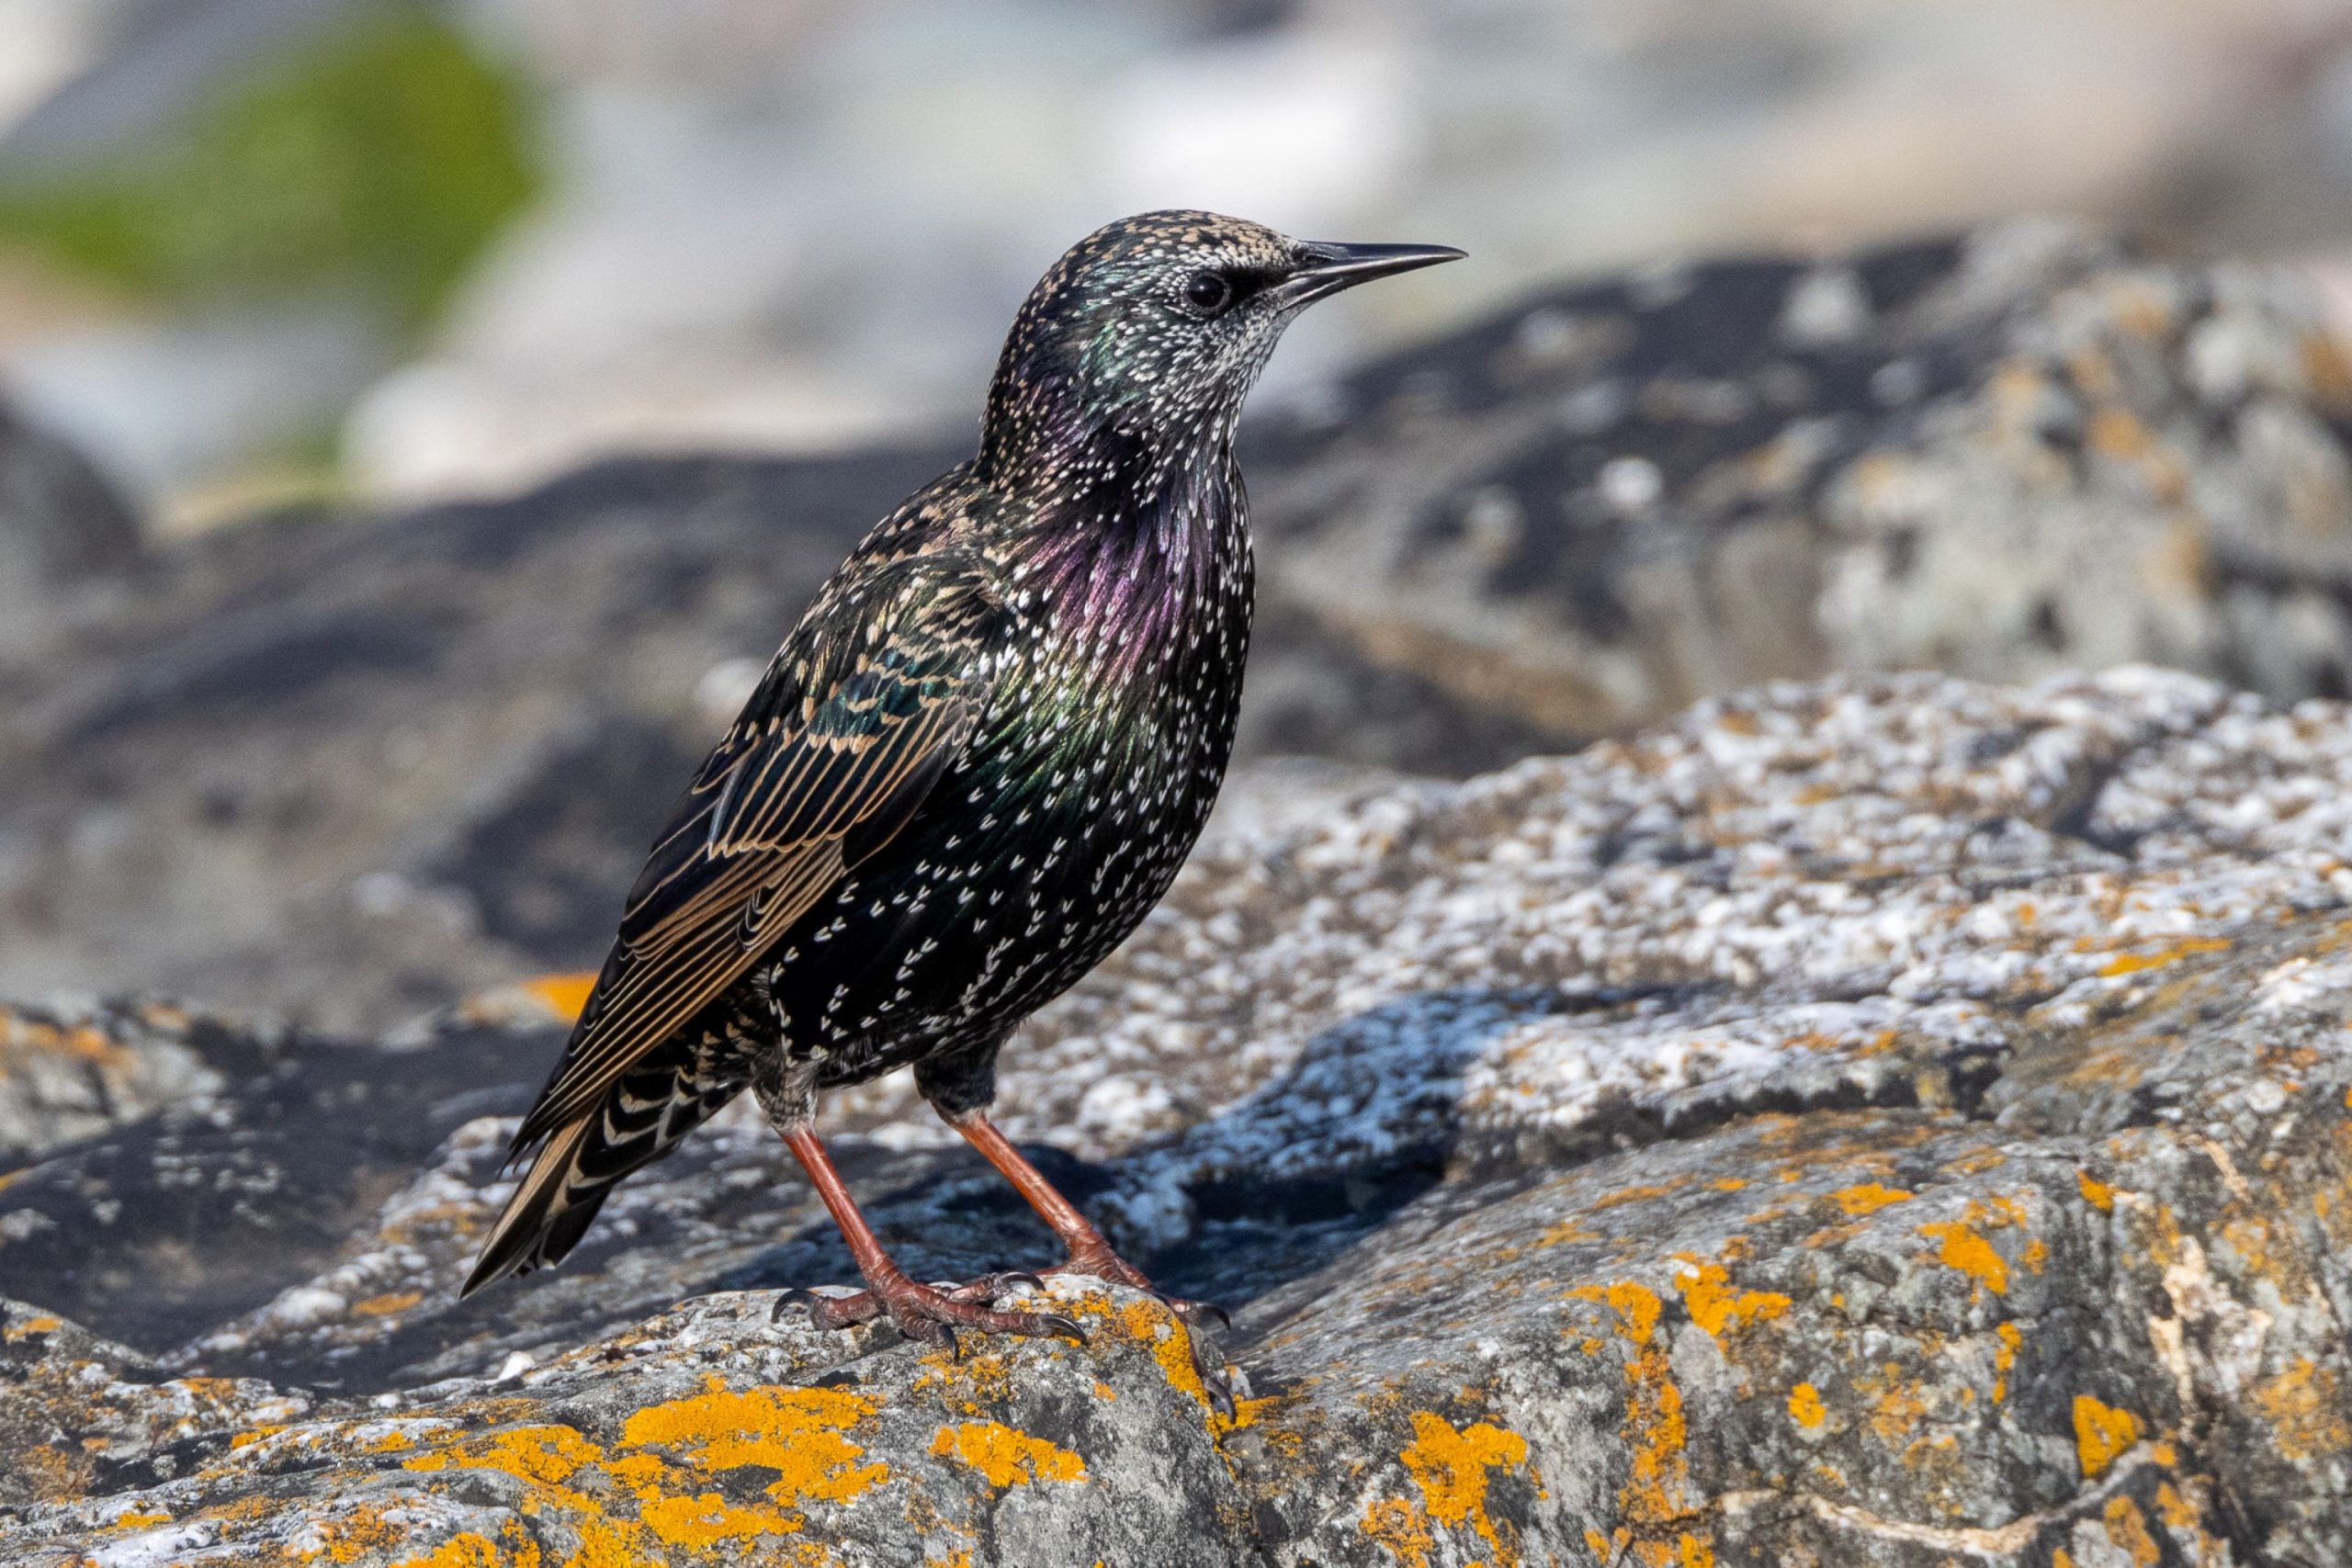 Starling perched on rocks at low tide, Portmarnock, Dublin, Ireland